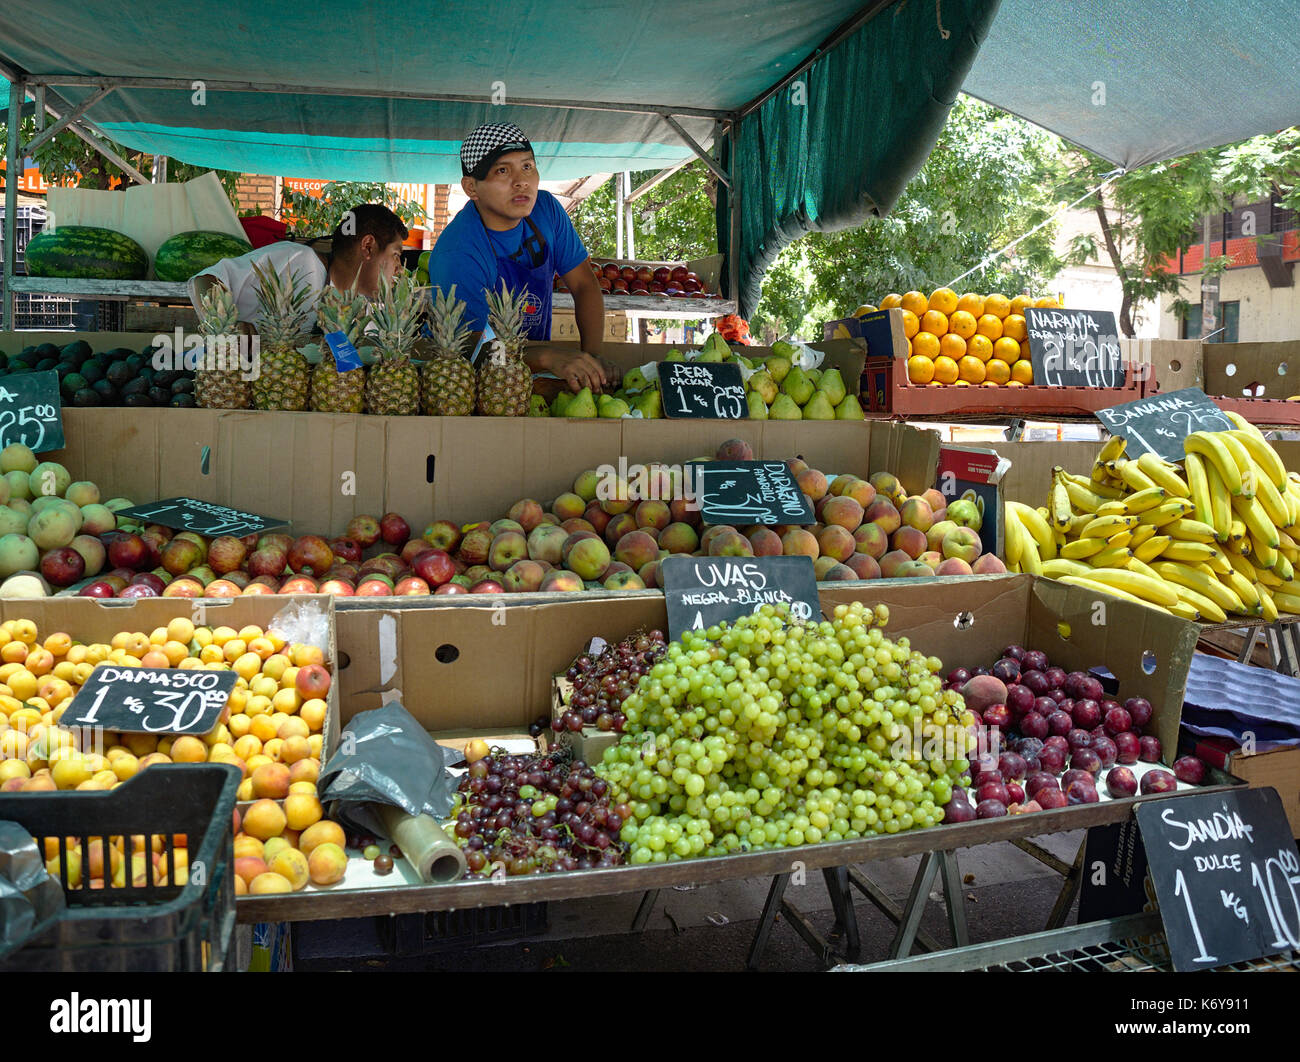 Cordoba, Argentina - 2107: A temporary vegetables market on the street near the city center on a hot summer day. Stock Photo